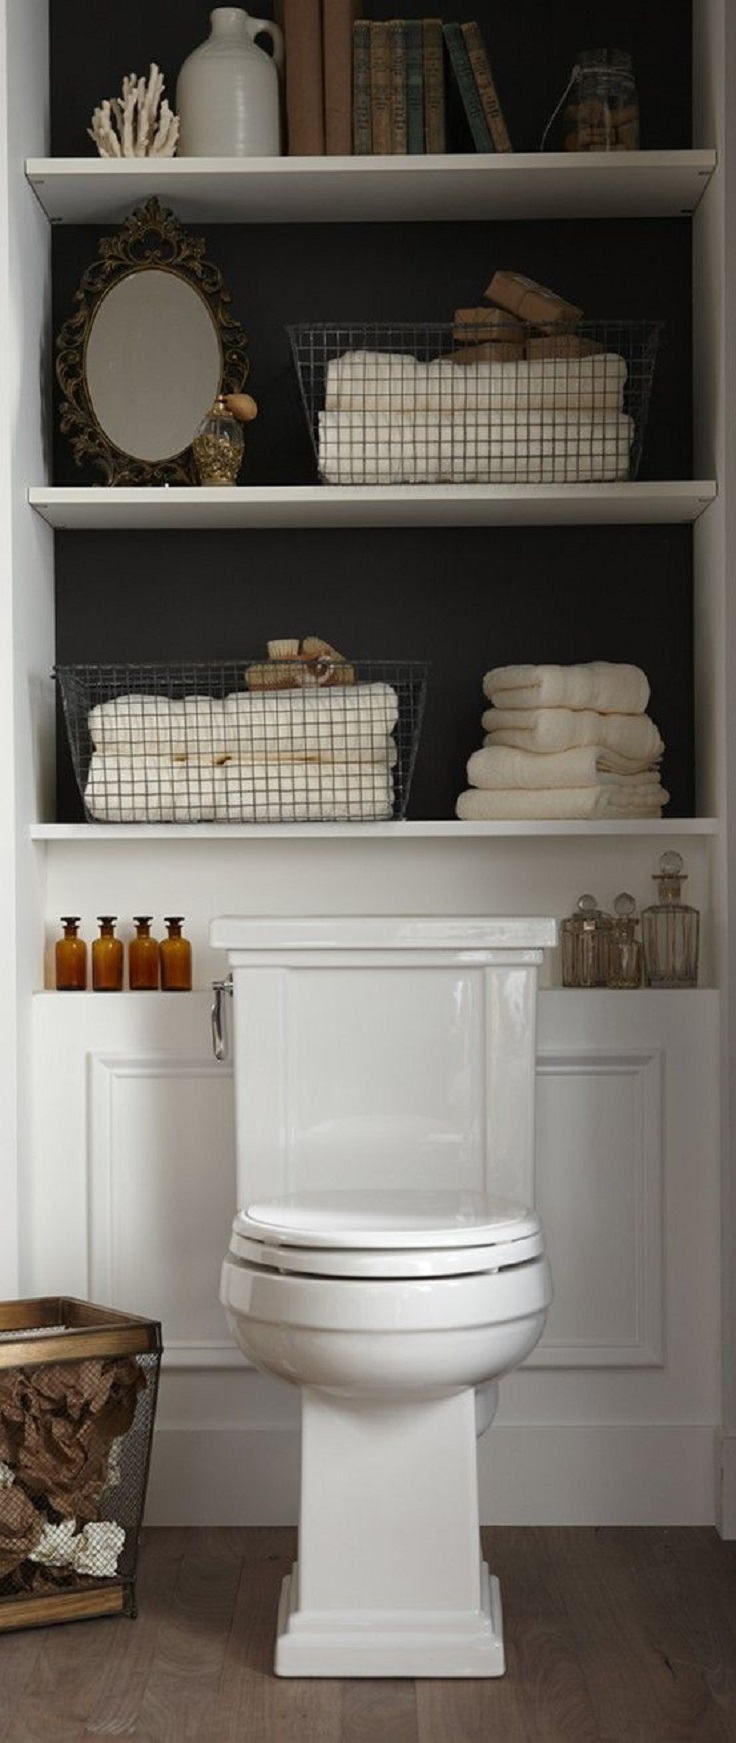 Top 10 Best Ideas for Bathroom Organization | Top Inspired